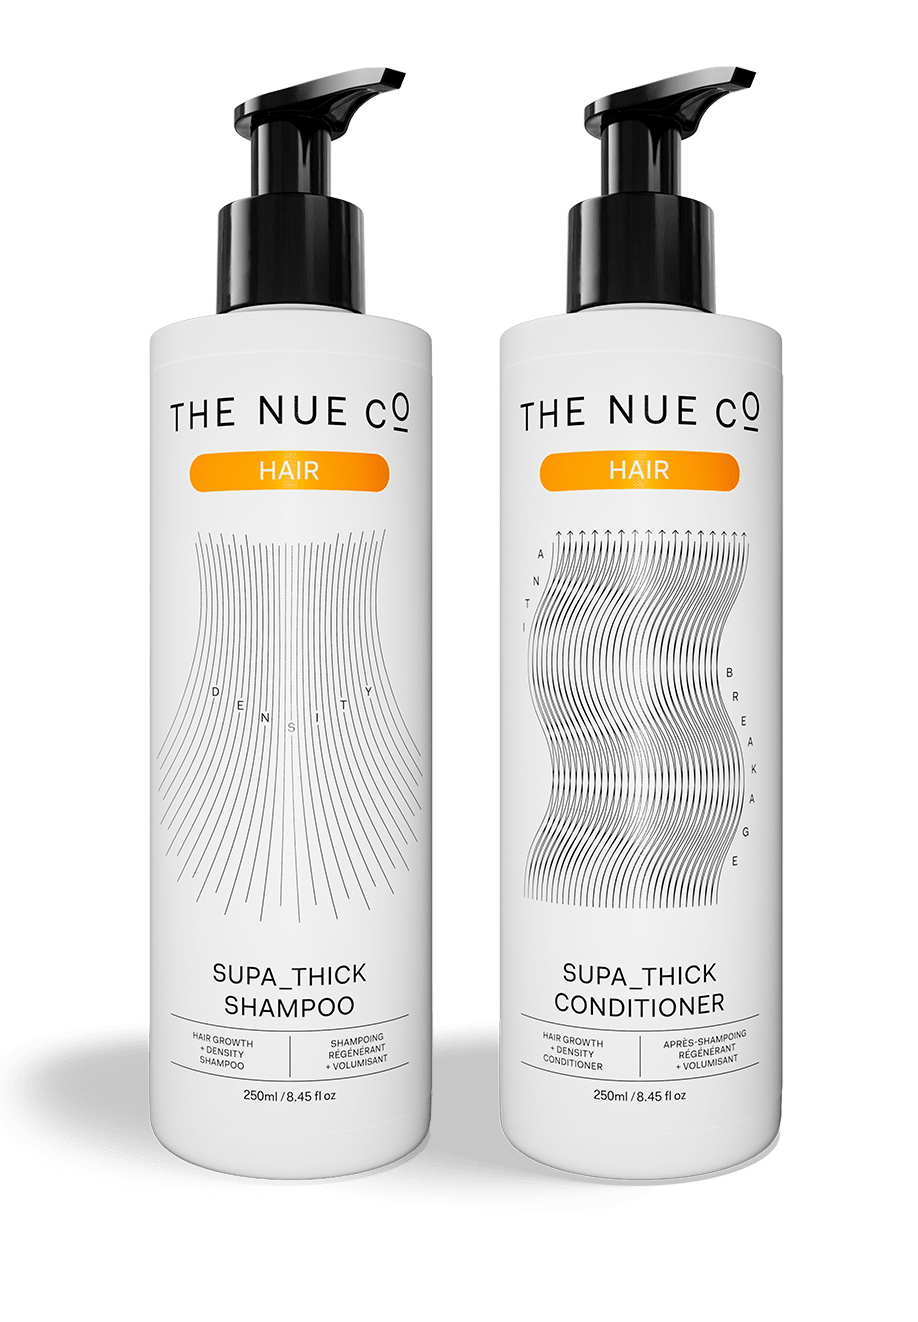 SUPA_THICK SHAMPOO + CONDITIONER The Nue Co. UK 